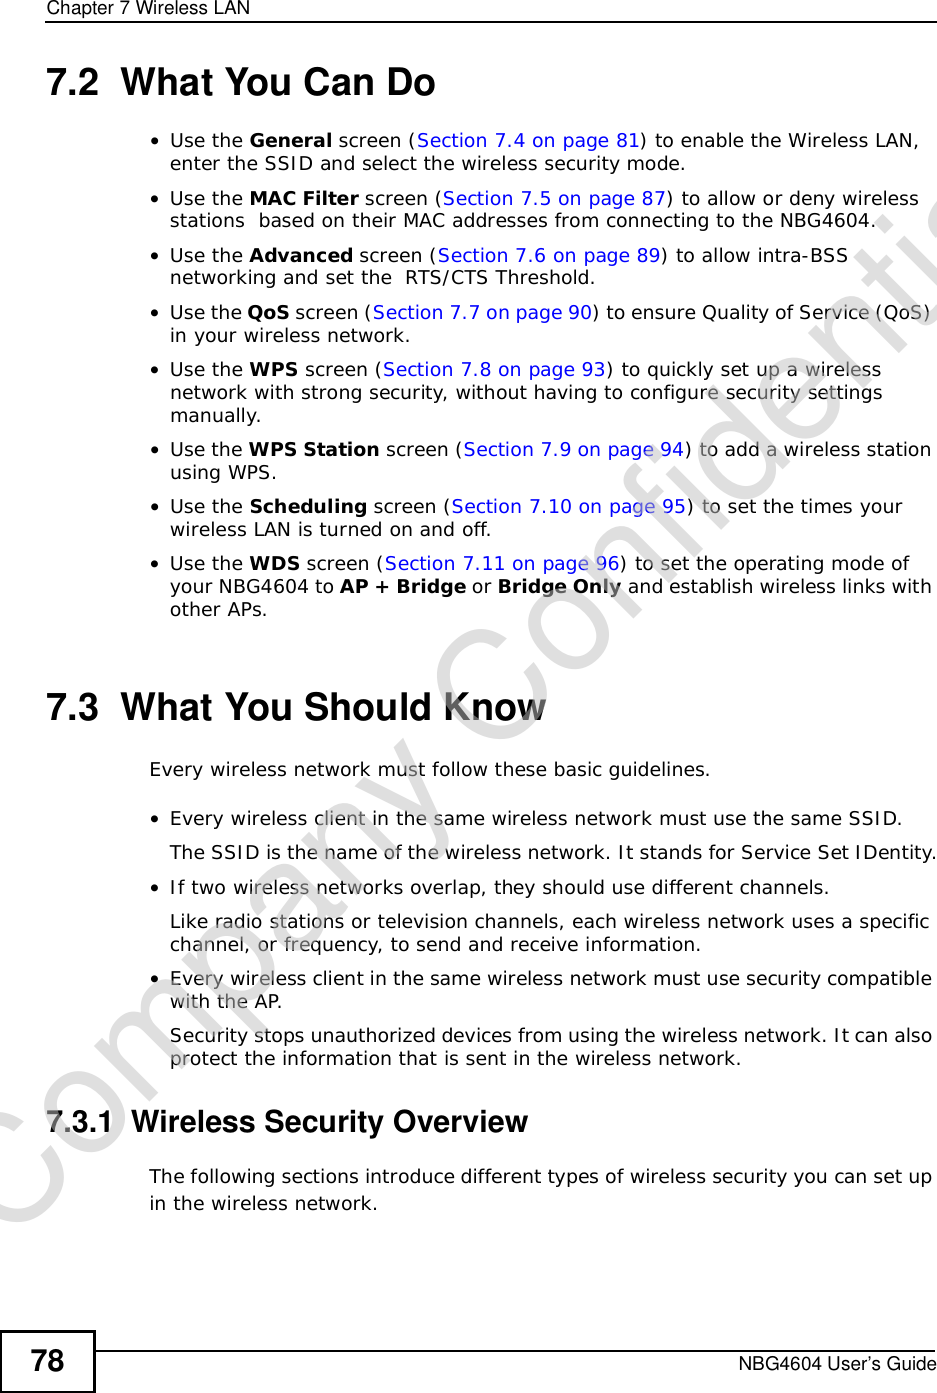 Chapter 7Wireless LANNBG4604 User’s Guide787.2  What You Can Do•Use the General screen (Section 7.4 on page 81) to enable the Wireless LAN, enter the SSID and select the wireless security mode.•Use the MAC Filter screen (Section 7.5 on page 87) to allow or deny wireless stations  based on their MAC addresses from connecting to the NBG4604.•Use the Advanced screen (Section 7.6 on page 89) to allow intra-BSS networking and set the  RTS/CTS Threshold.•Use the QoS screen (Section 7.7 on page 90) to ensure Quality of Service (QoS) in your wireless network.•Use the WPS screen (Section 7.8 on page 93) to quickly set up a wireless network with strong security, without having to configure security settings manually.•Use the WPS Station screen (Section 7.9 on page 94) to add a wireless station using WPS. •Use the Scheduling screen (Section 7.10 on page 95) to set the times your wireless LAN is turned on and off.•Use the WDS screen (Section 7.11 on page 96) to set the operating mode of your NBG4604 to AP + Bridge or Bridge Only and establish wireless links with other APs. 7.3  What You Should KnowEvery wireless network must follow these basic guidelines.•Every wireless client in the same wireless network must use the same SSID.The SSID is the name of the wireless network. It stands for Service Set IDentity.•If two wireless networks overlap, they should use different channels.Like radio stations or television channels, each wireless network uses a specific channel, or frequency, to send and receive information.•Every wireless client in the same wireless network must use security compatible with the AP.Security stops unauthorized devices from using the wireless network. It can also protect the information that is sent in the wireless network.7.3.1  Wireless Security OverviewThe following sections introduce different types of wireless security you can set up in the wireless network.Company Confidential